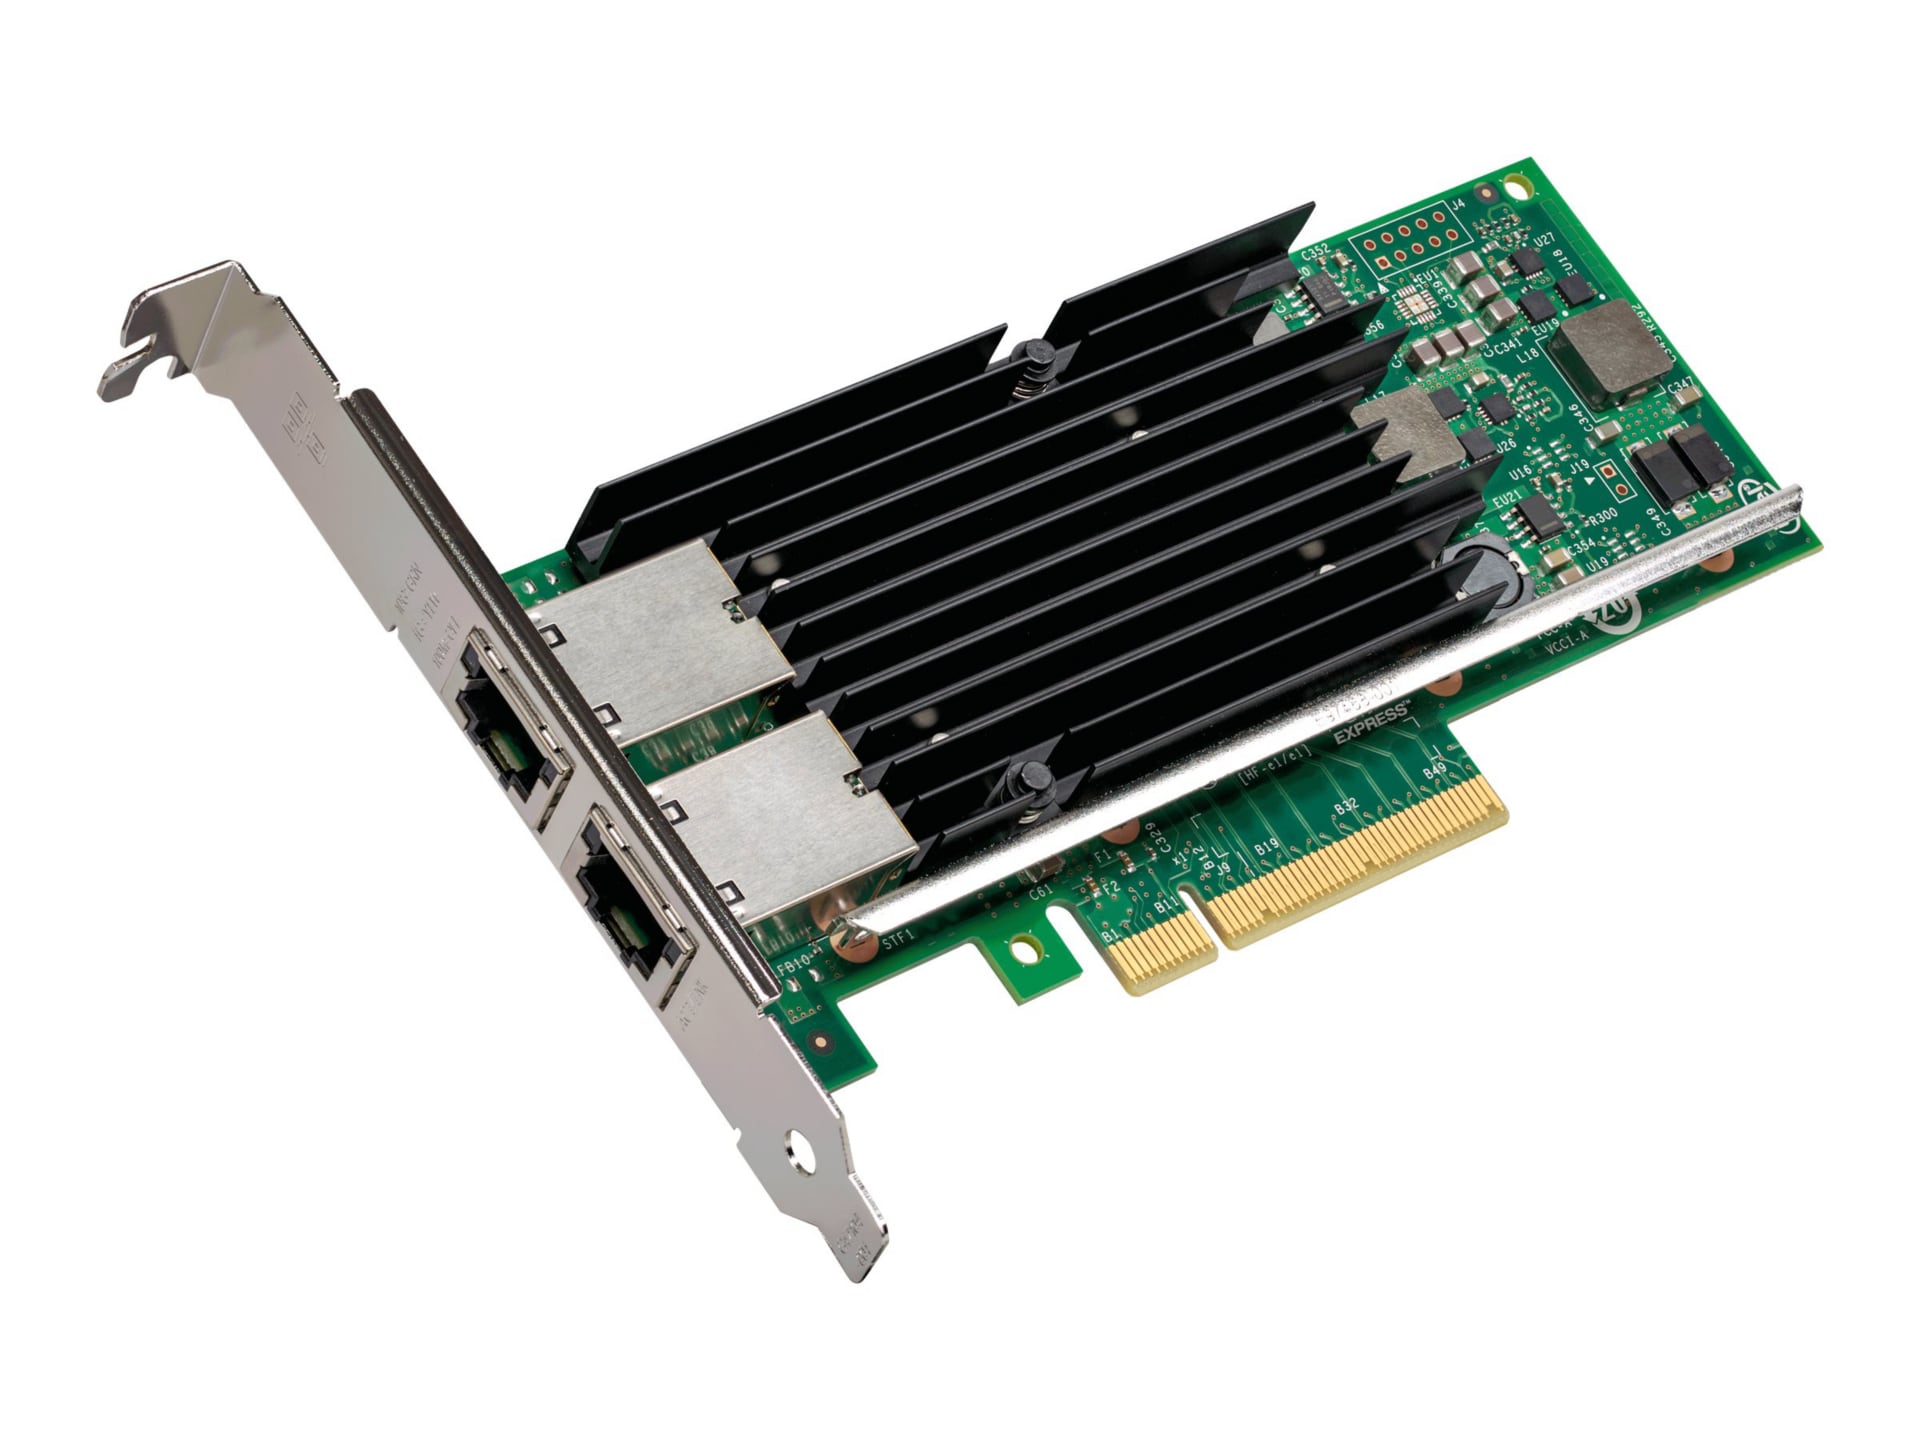 Intel Ethernet Converged Network Adapter X540-T2 - network adapter - PCIe 2.1 x8 - 10Gb Ethernet x 2